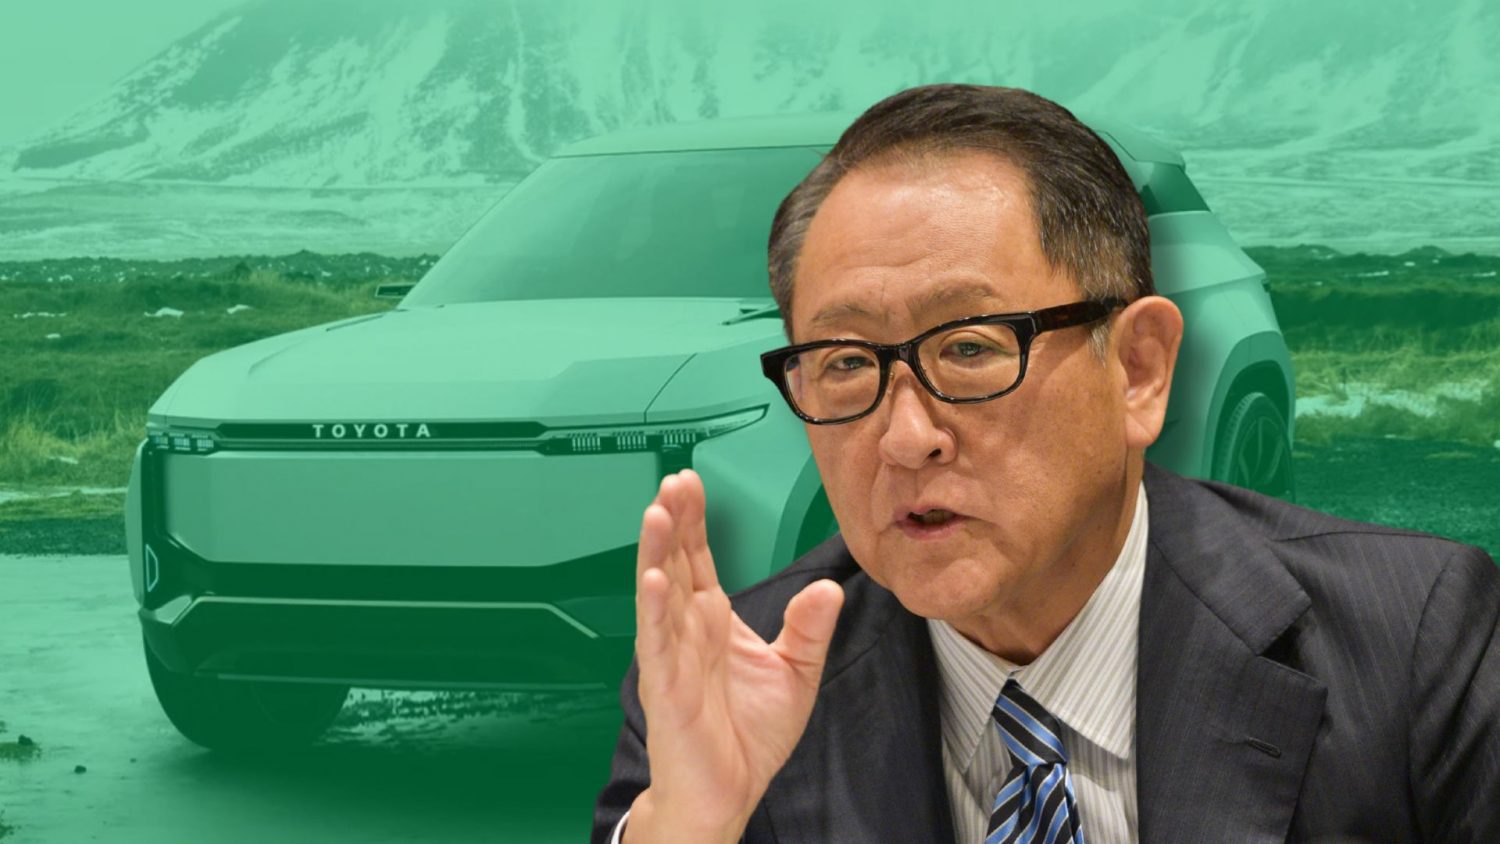 Toyota chairman Akio Toyoda expects EV market share to reach a total of 30% "no matter how much progress BEVs make."